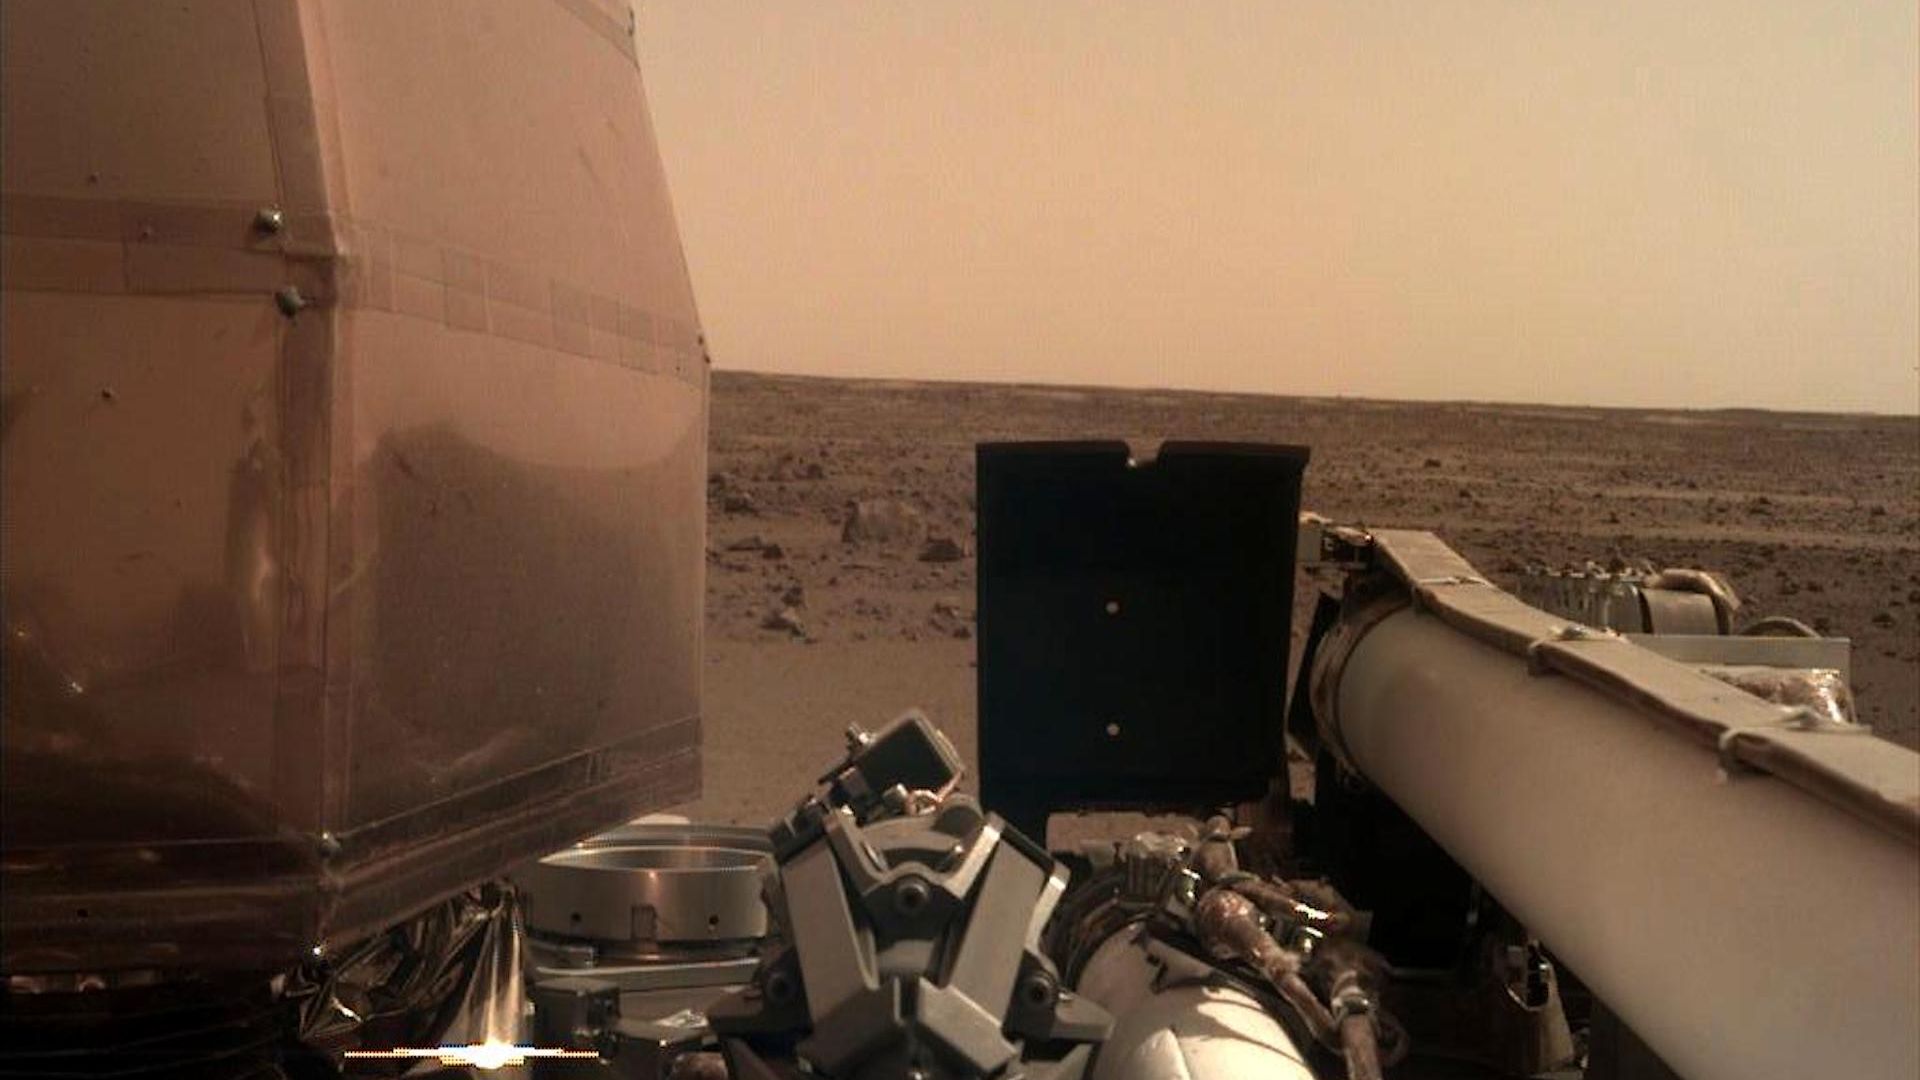 The Instrument Deployment Camera (IDC), located on the robotic arm of NASA's InSight lander, took this picture of the Martian surface on Nov. 26, 2018.